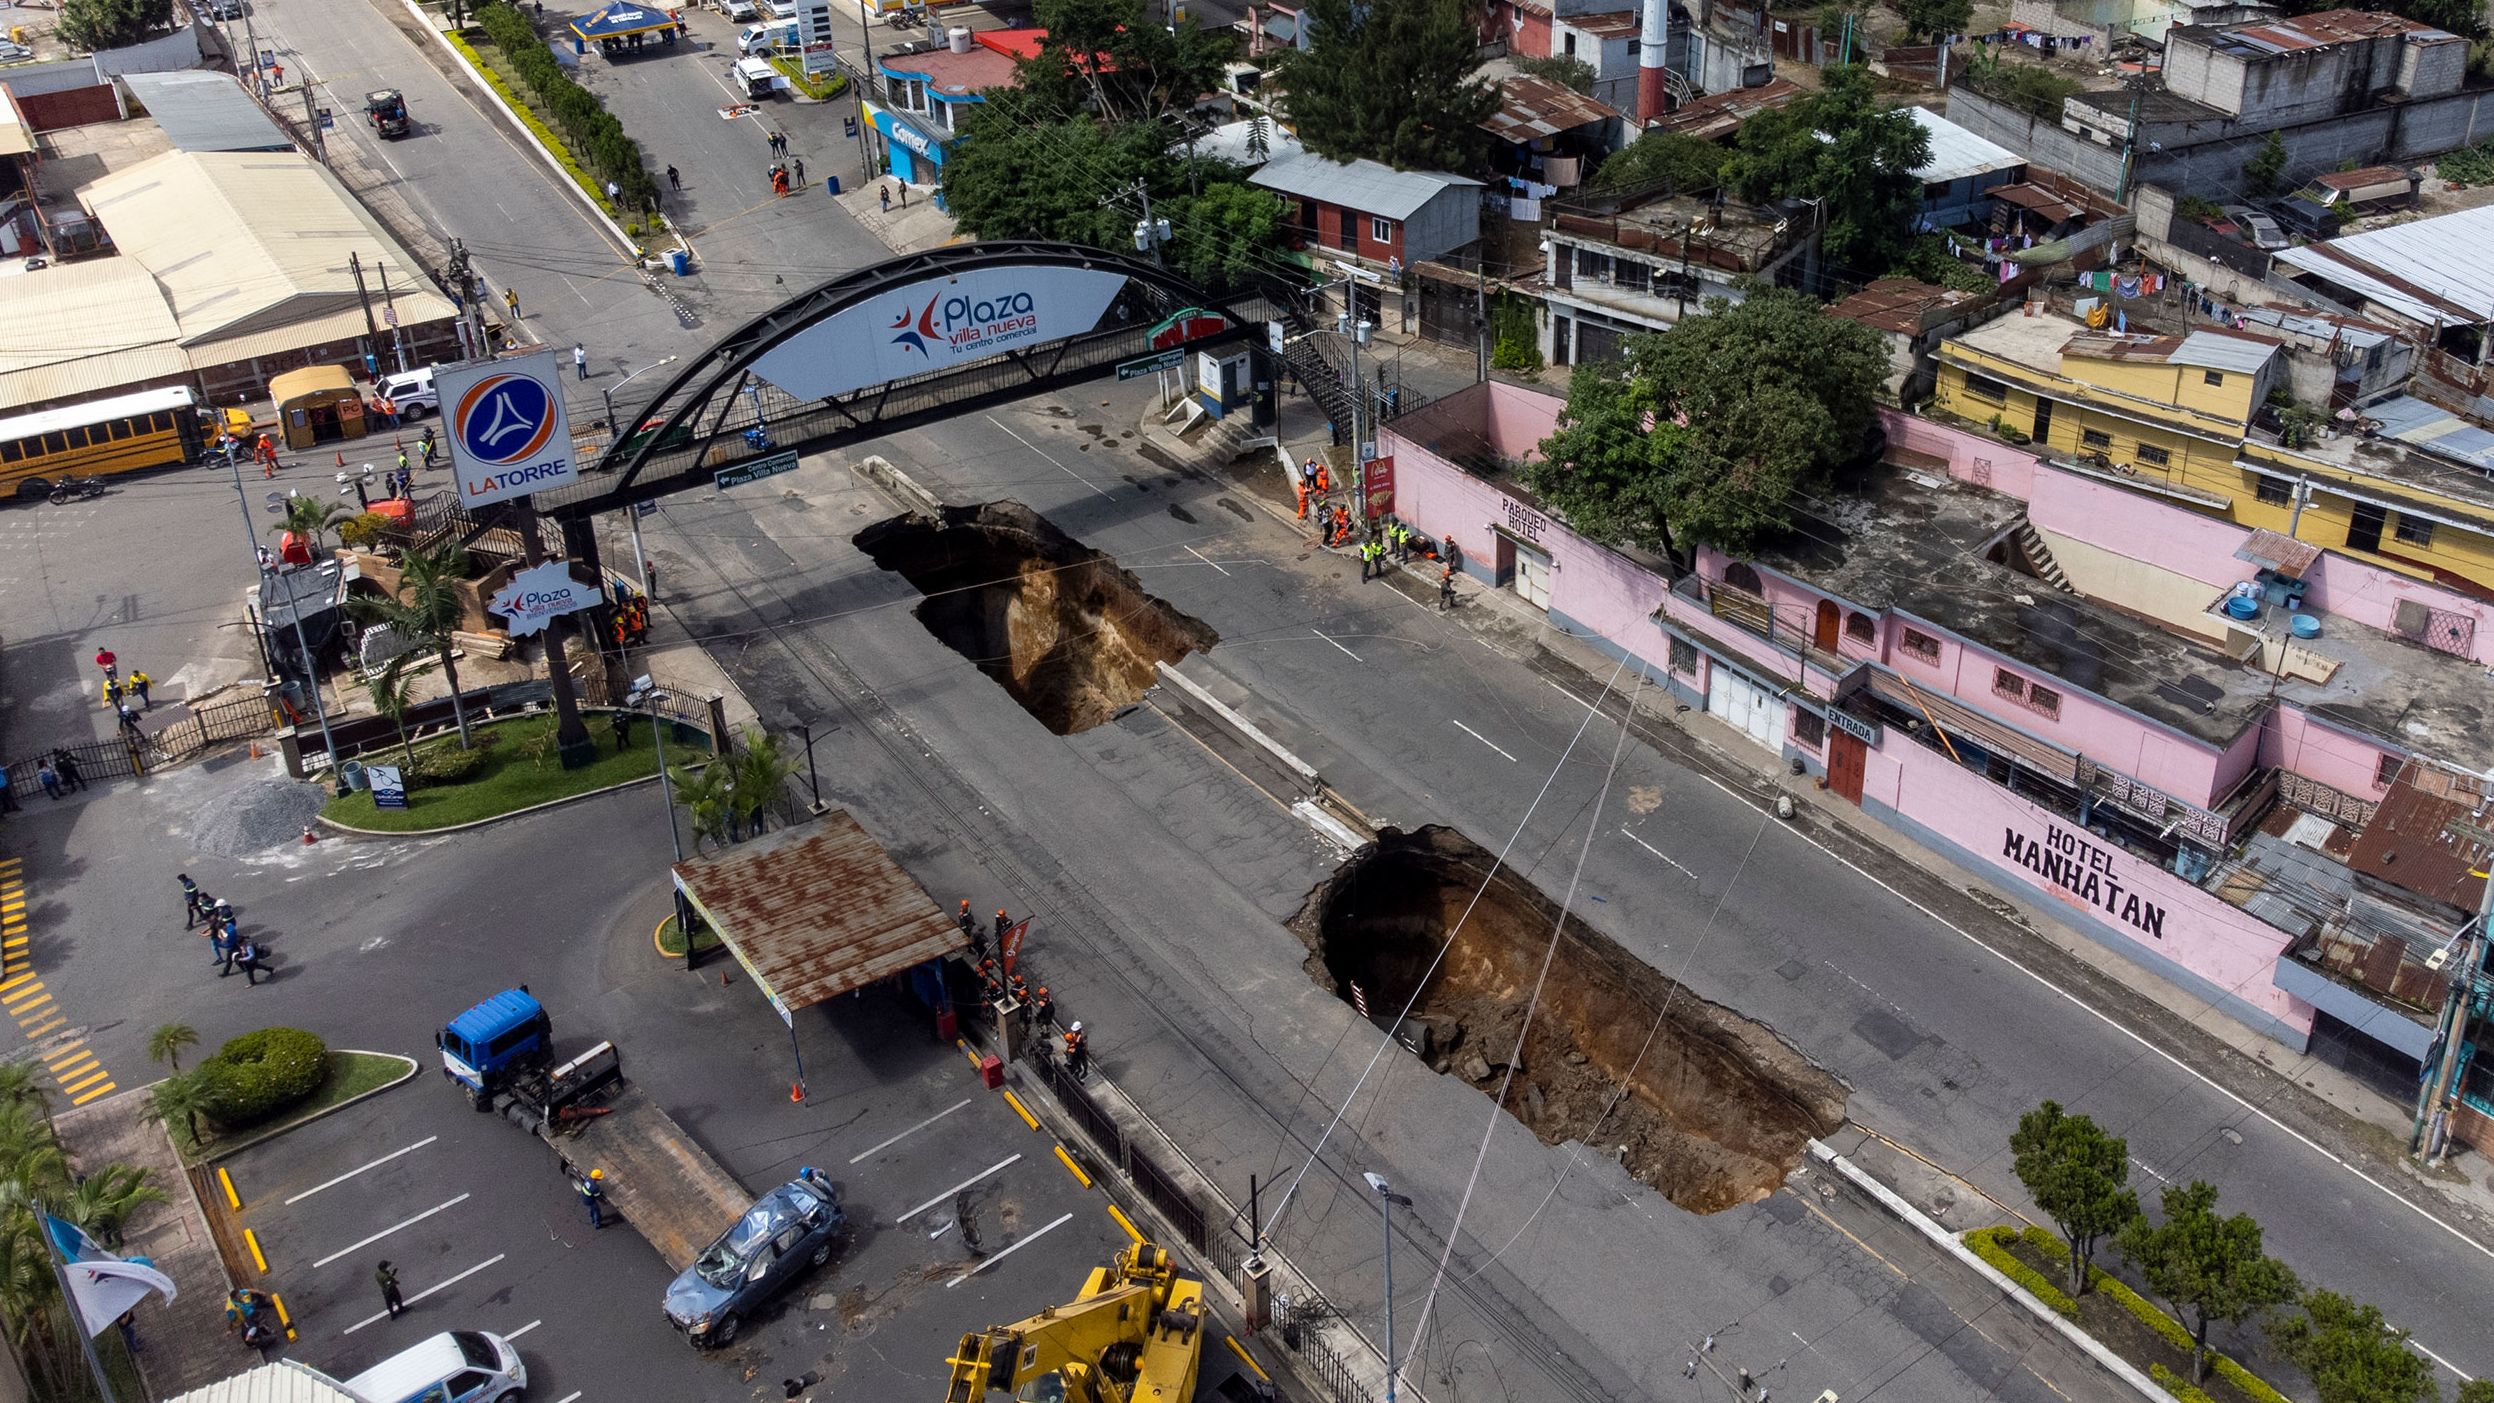 Two sinkholes are exposed on a street in Villa Nueva, Guatemala, on Sunday, September 25. Three people were injured and two were missing after <a href="https://www.cnn.com/videos/world/2022/09/26/sinkholes-guatemala-injured-missing-lon-orig-na.cnn" target="_blank">the sinkholes</a> opened up the day before, according to the Reuters news agency.